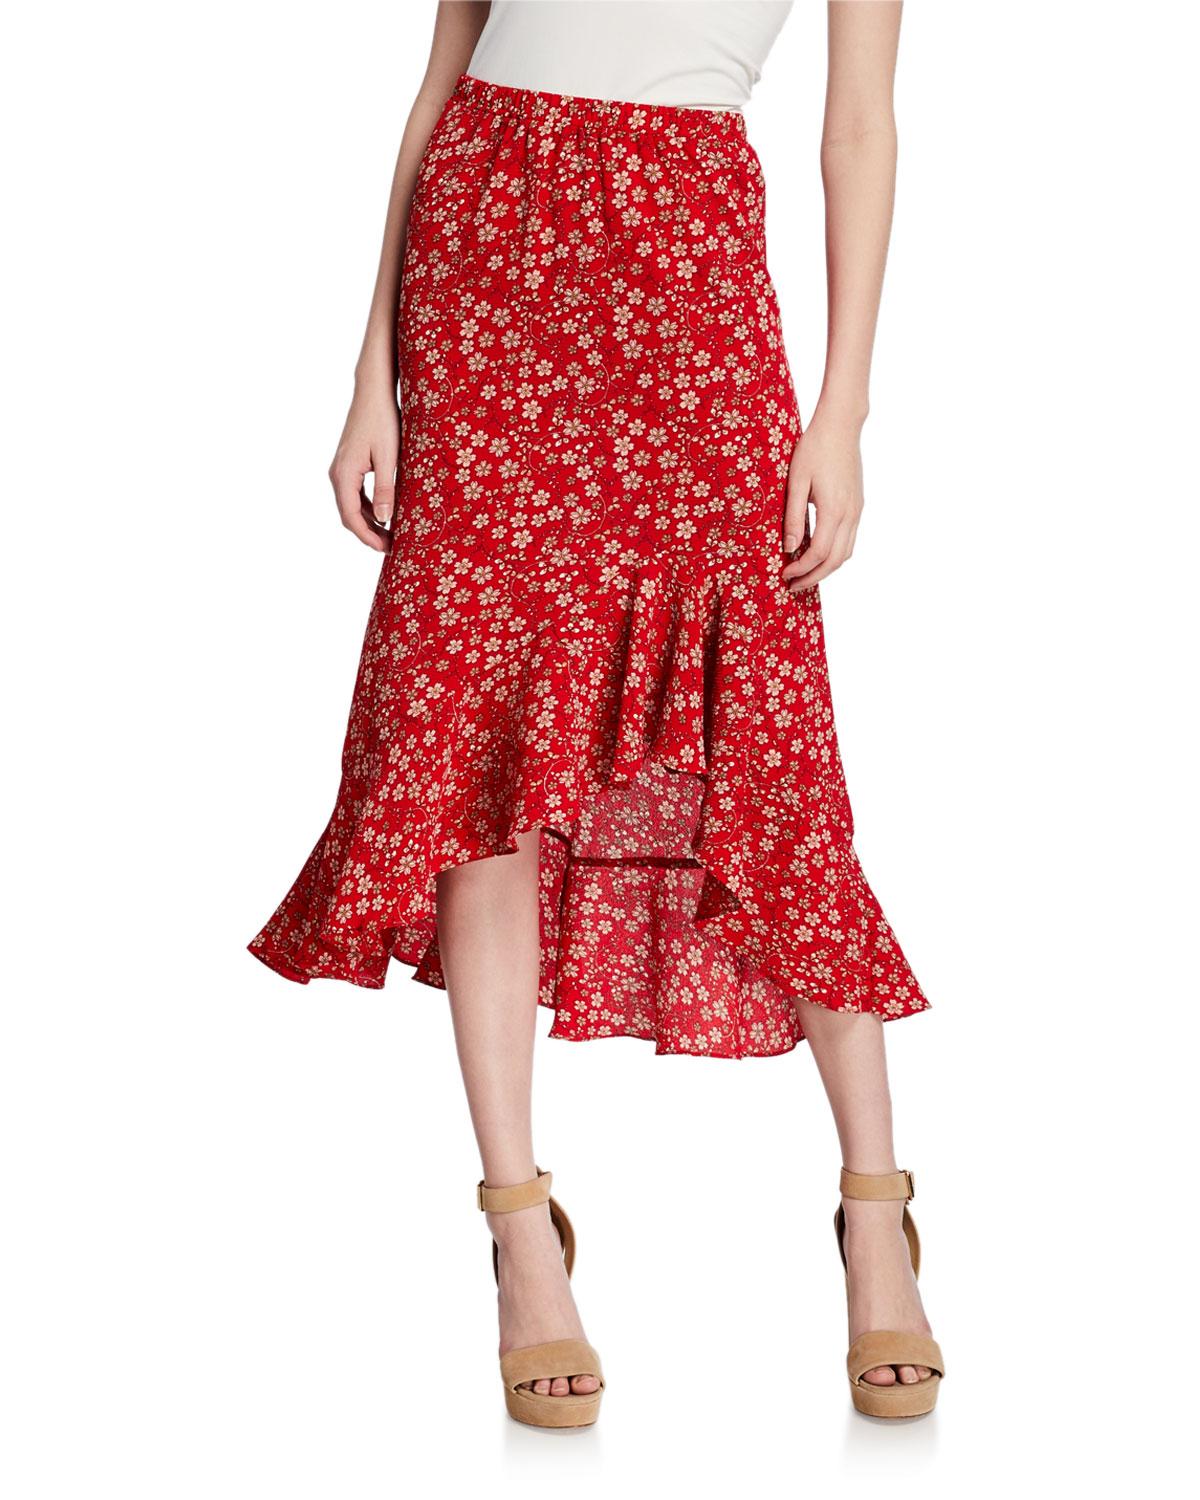 Lyst - Max Studio Raised Floral Flounce Maxi Skirt in Red